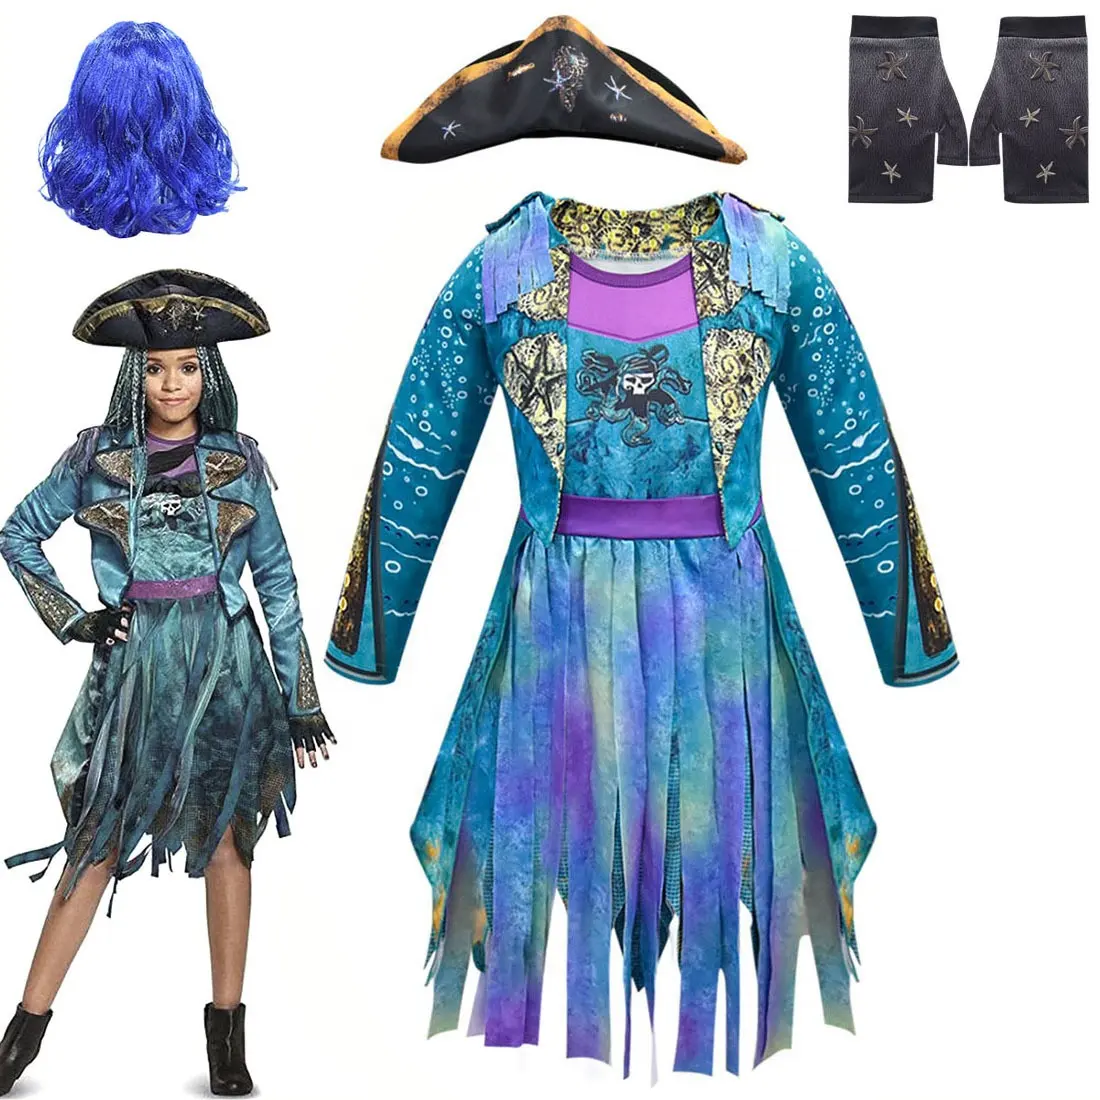 New Fashion Hot Sales Descendants 3 Uma Cosplay Costume Halloween Costumes Outfits 3 Piece Clothing Set Birthday Party Clothes